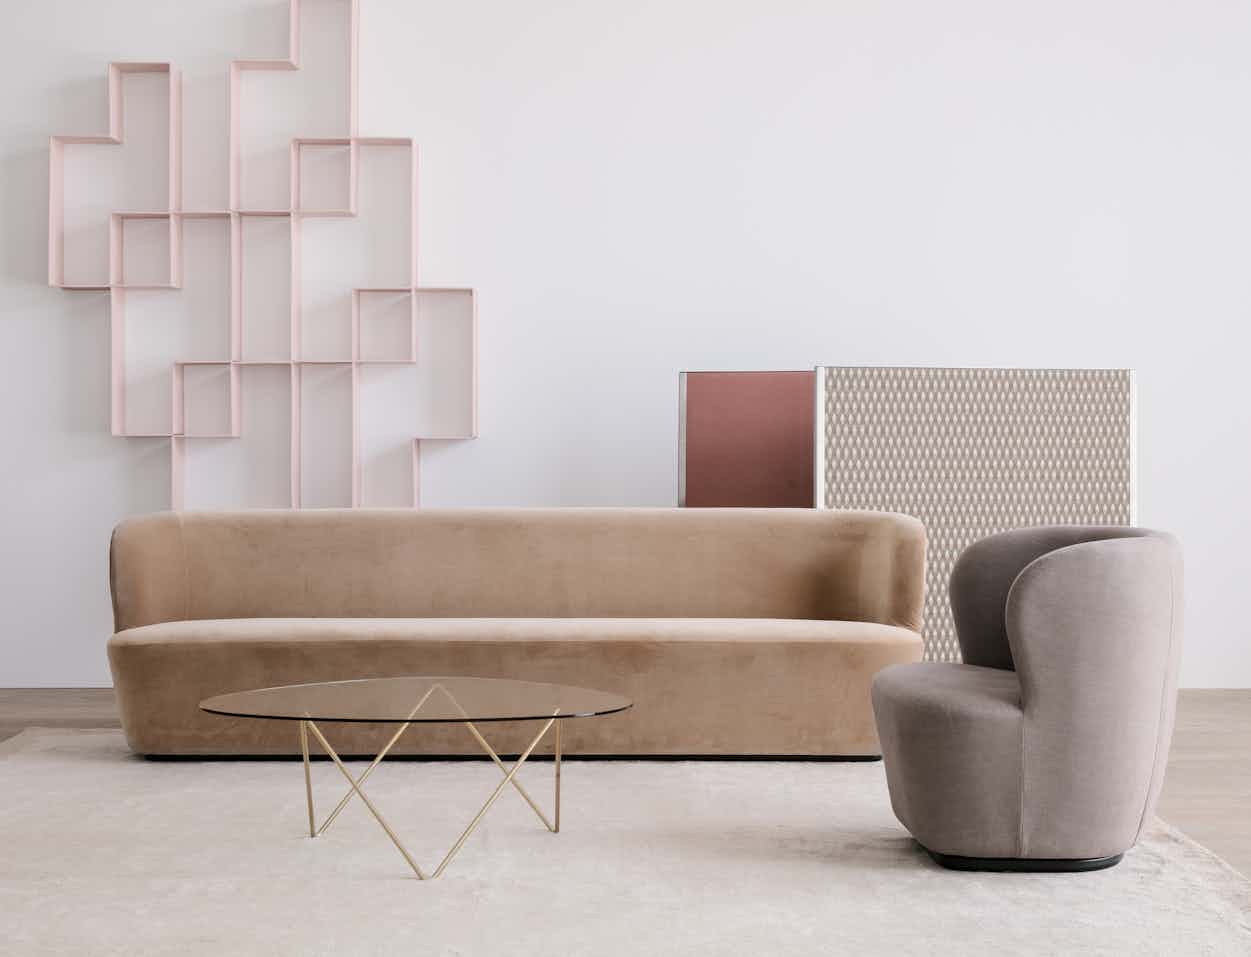 Stay Oval Sofa By Gubi At Haute Living